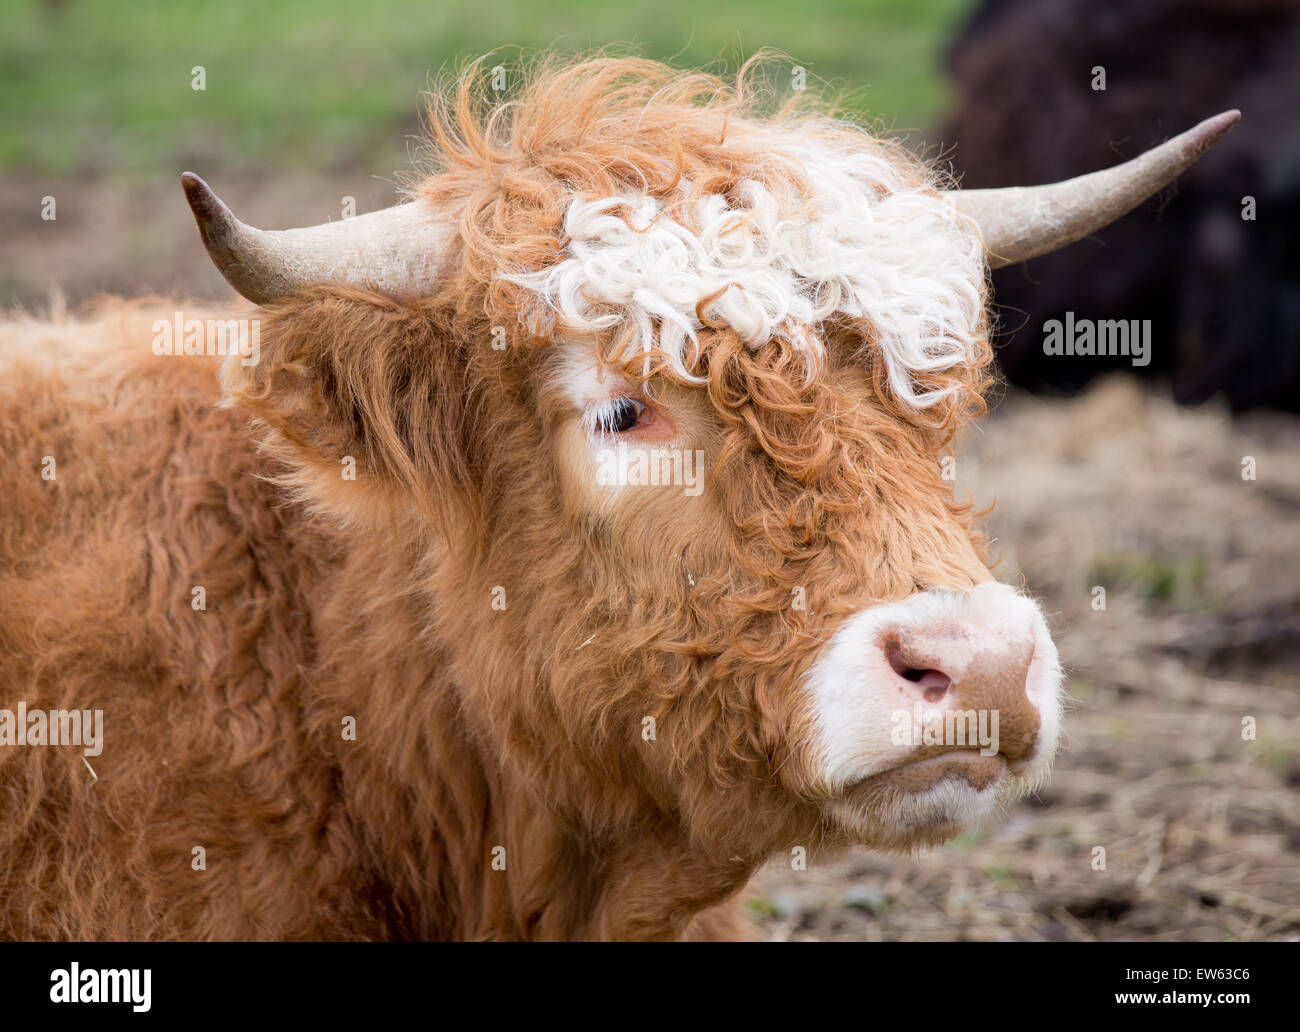 Horned Cow Sitting in a field staring directly at the camera Stock Photo